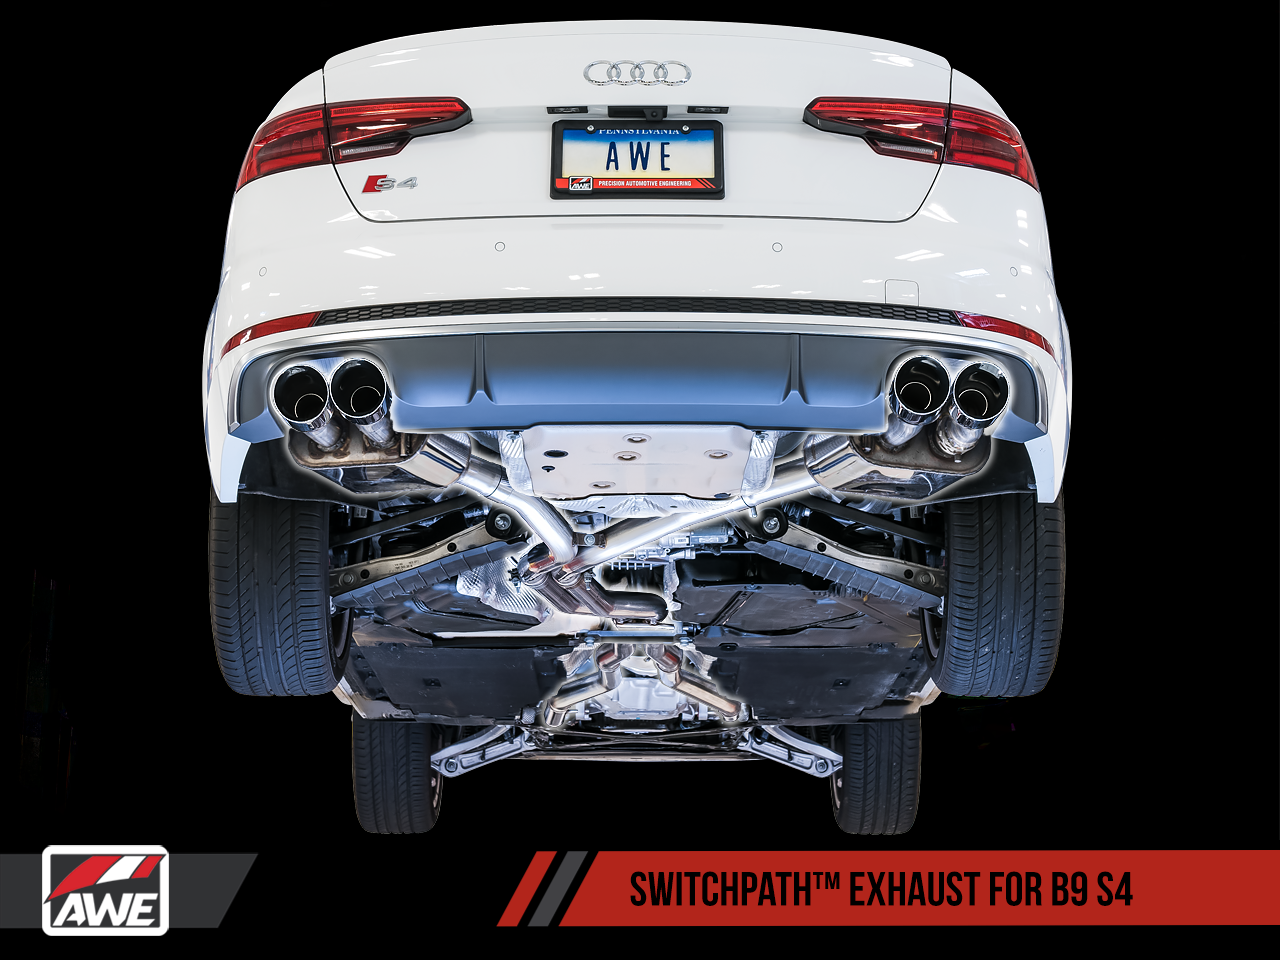 AWE SwitchPath™ Exhaust for B9 S4 - Resonated for Performance Catalyst - Diamond Black 90mm Tips